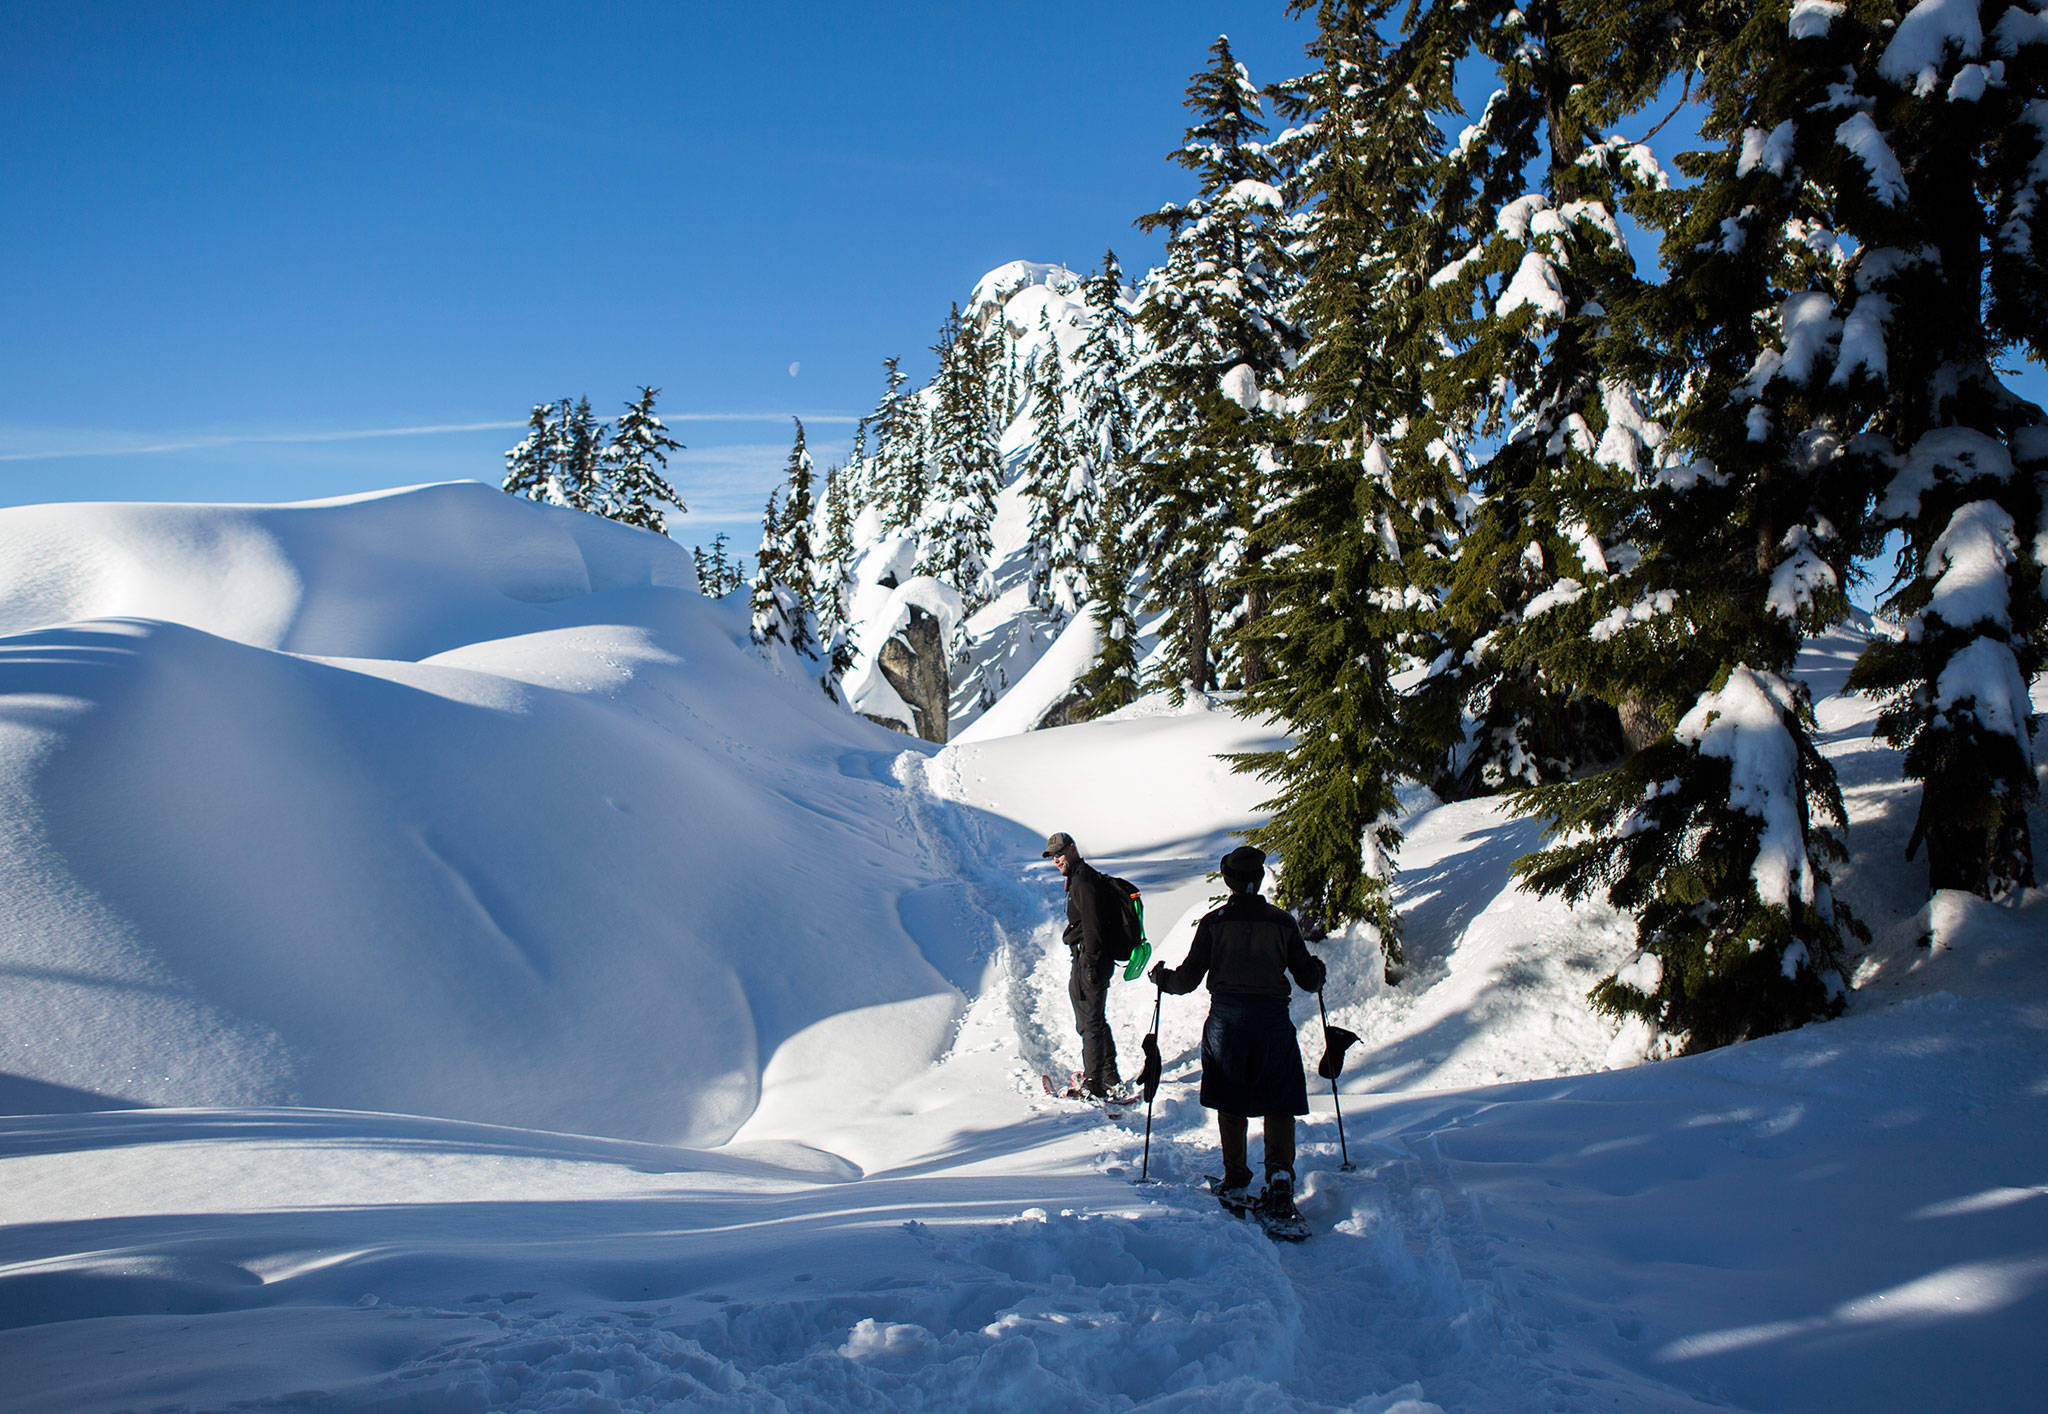 Sign up for a snowshoe tour with REI through the Mount Baker Lowlands — a mountainous winter wonderland that averages over 600 inches of snow annually. (Olivia Vanni / Herald file)